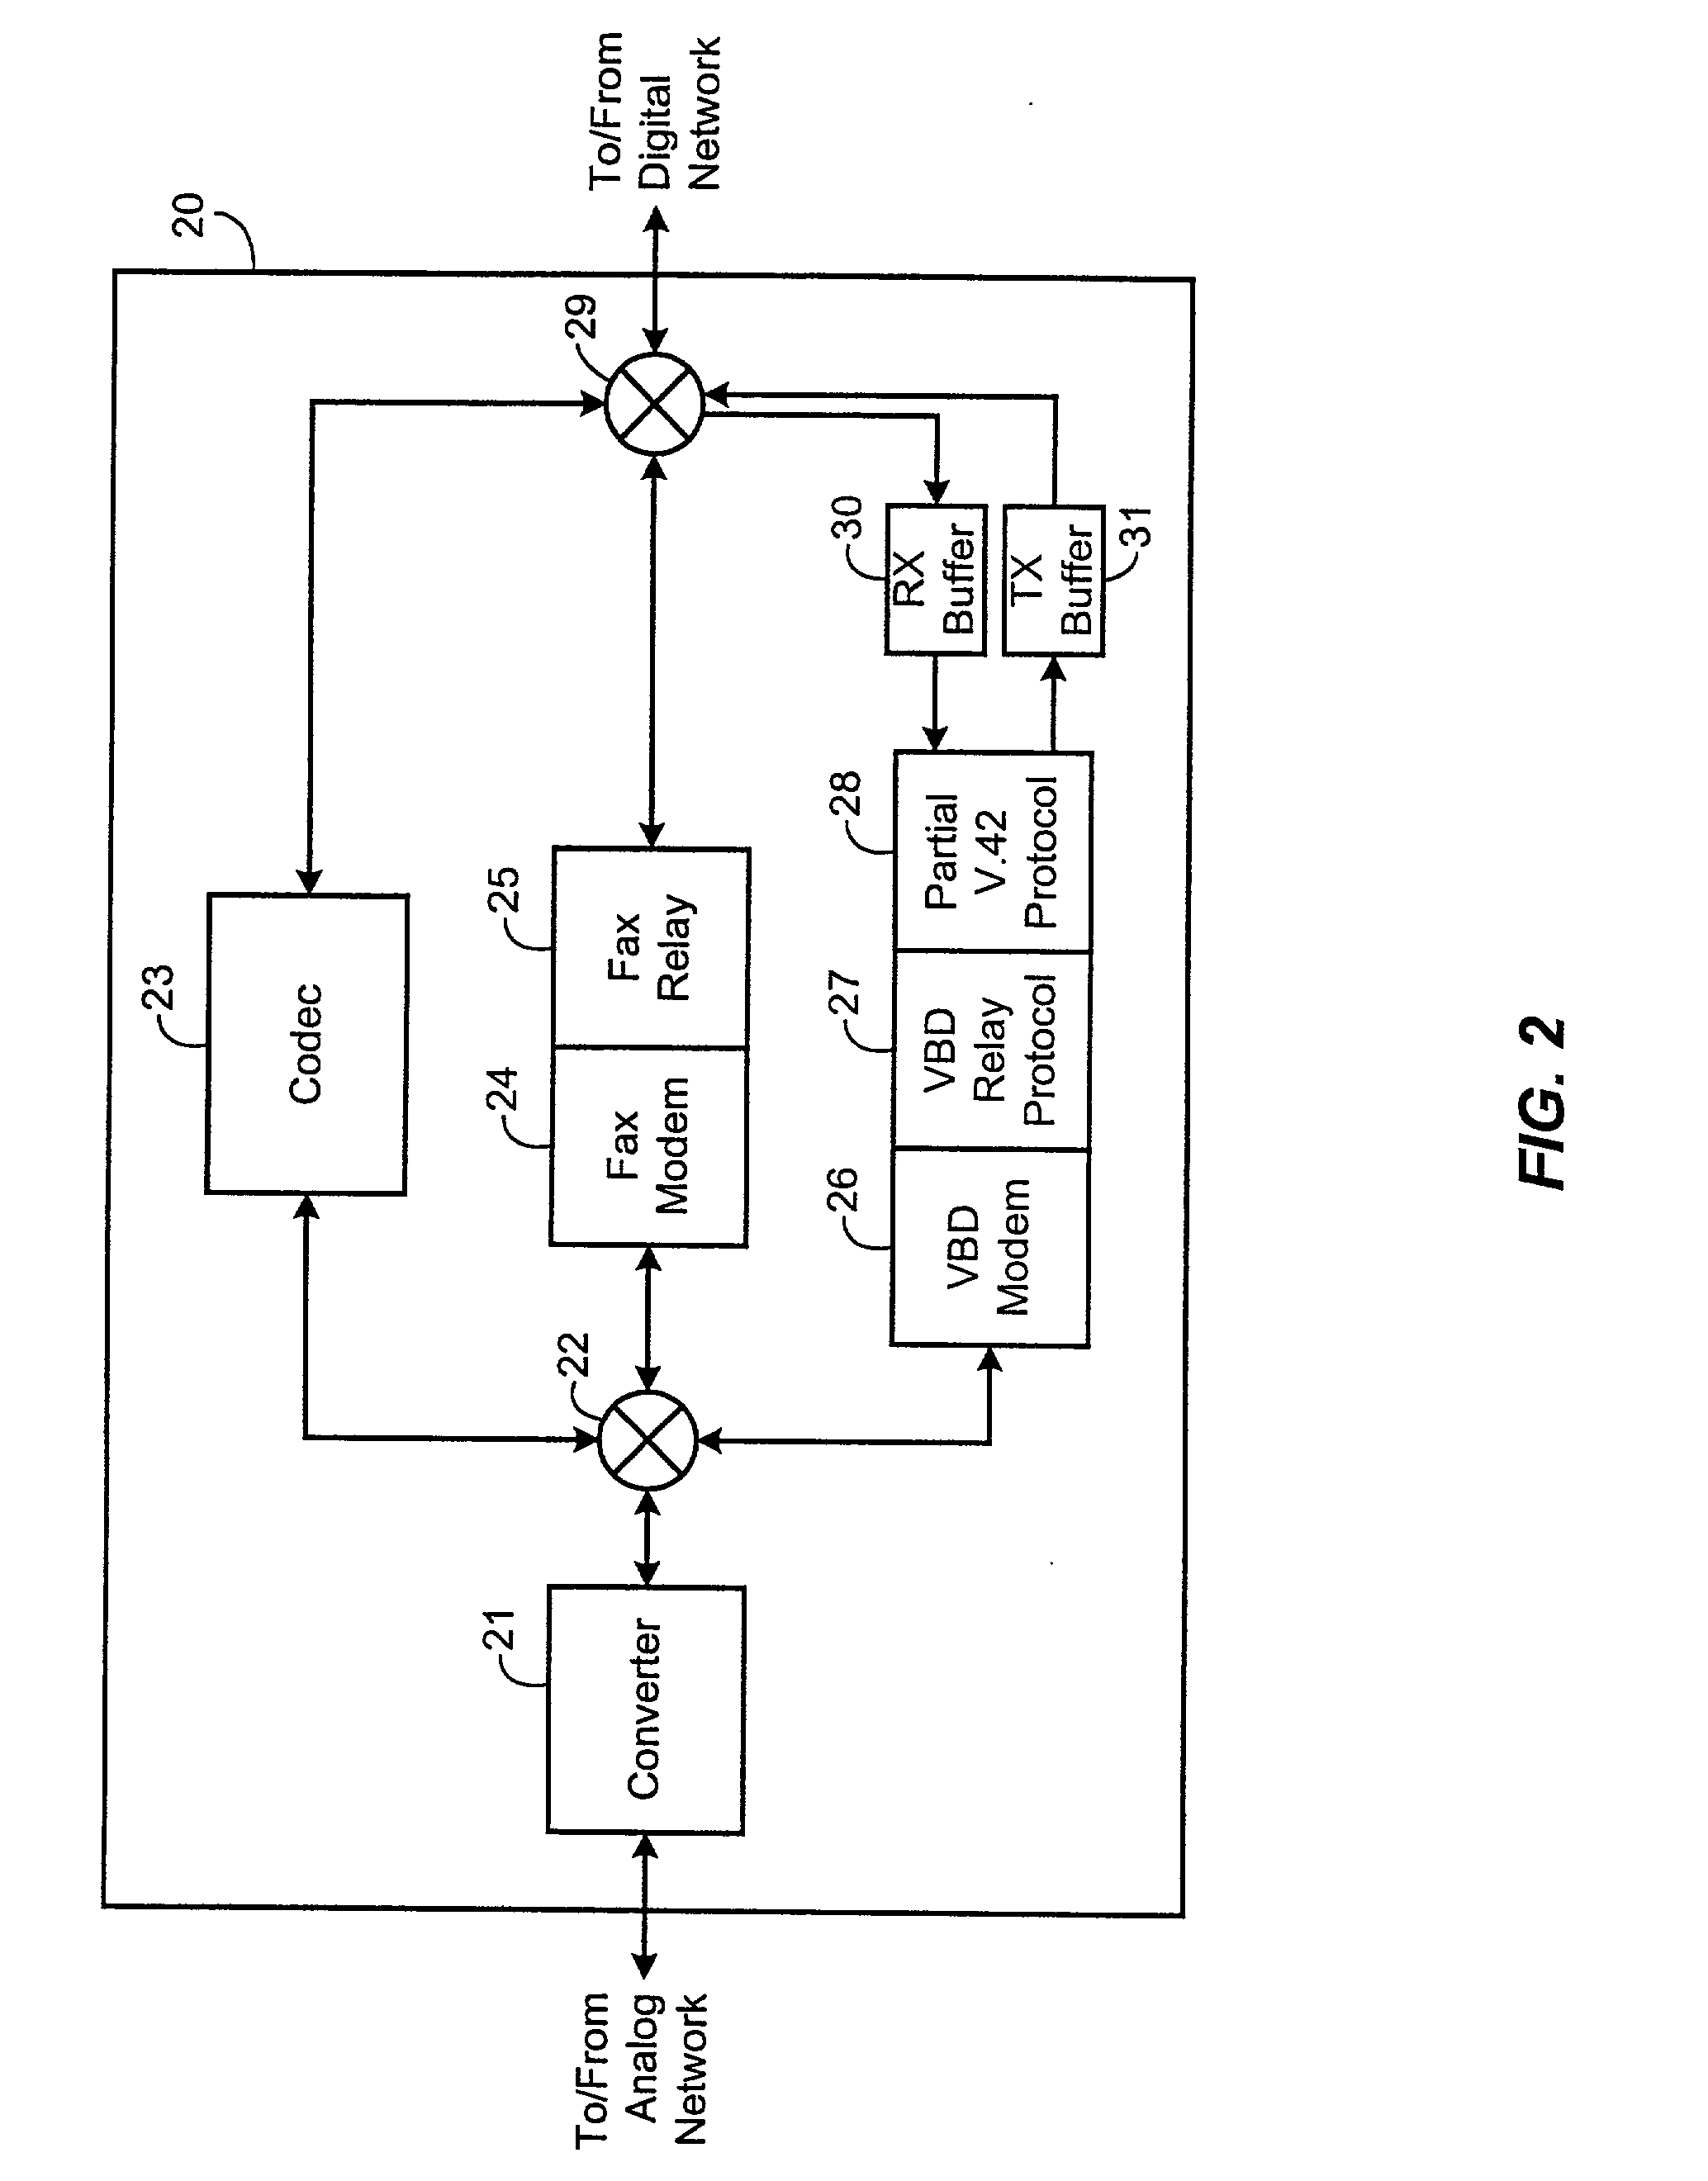 System and method for implementing an end-to-end error-correcting protocol in a voice band data relay system